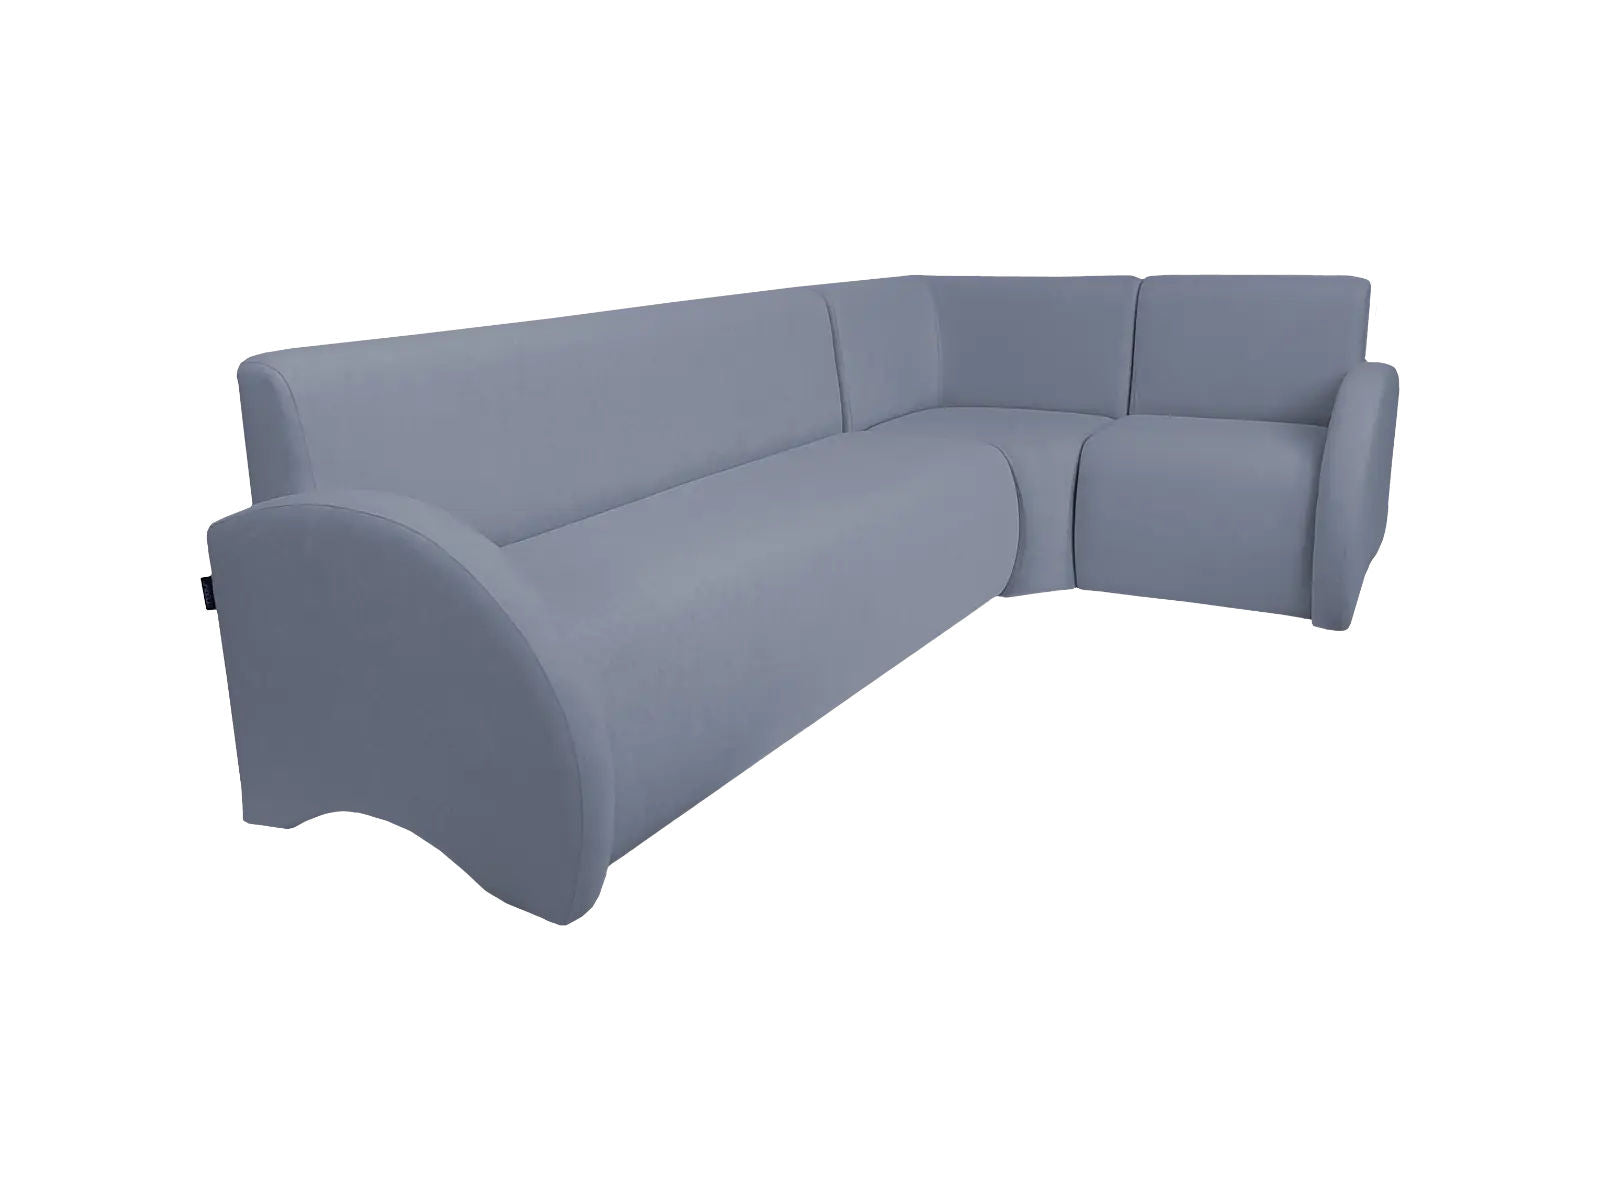 Linksseitiges Combo Couch Set